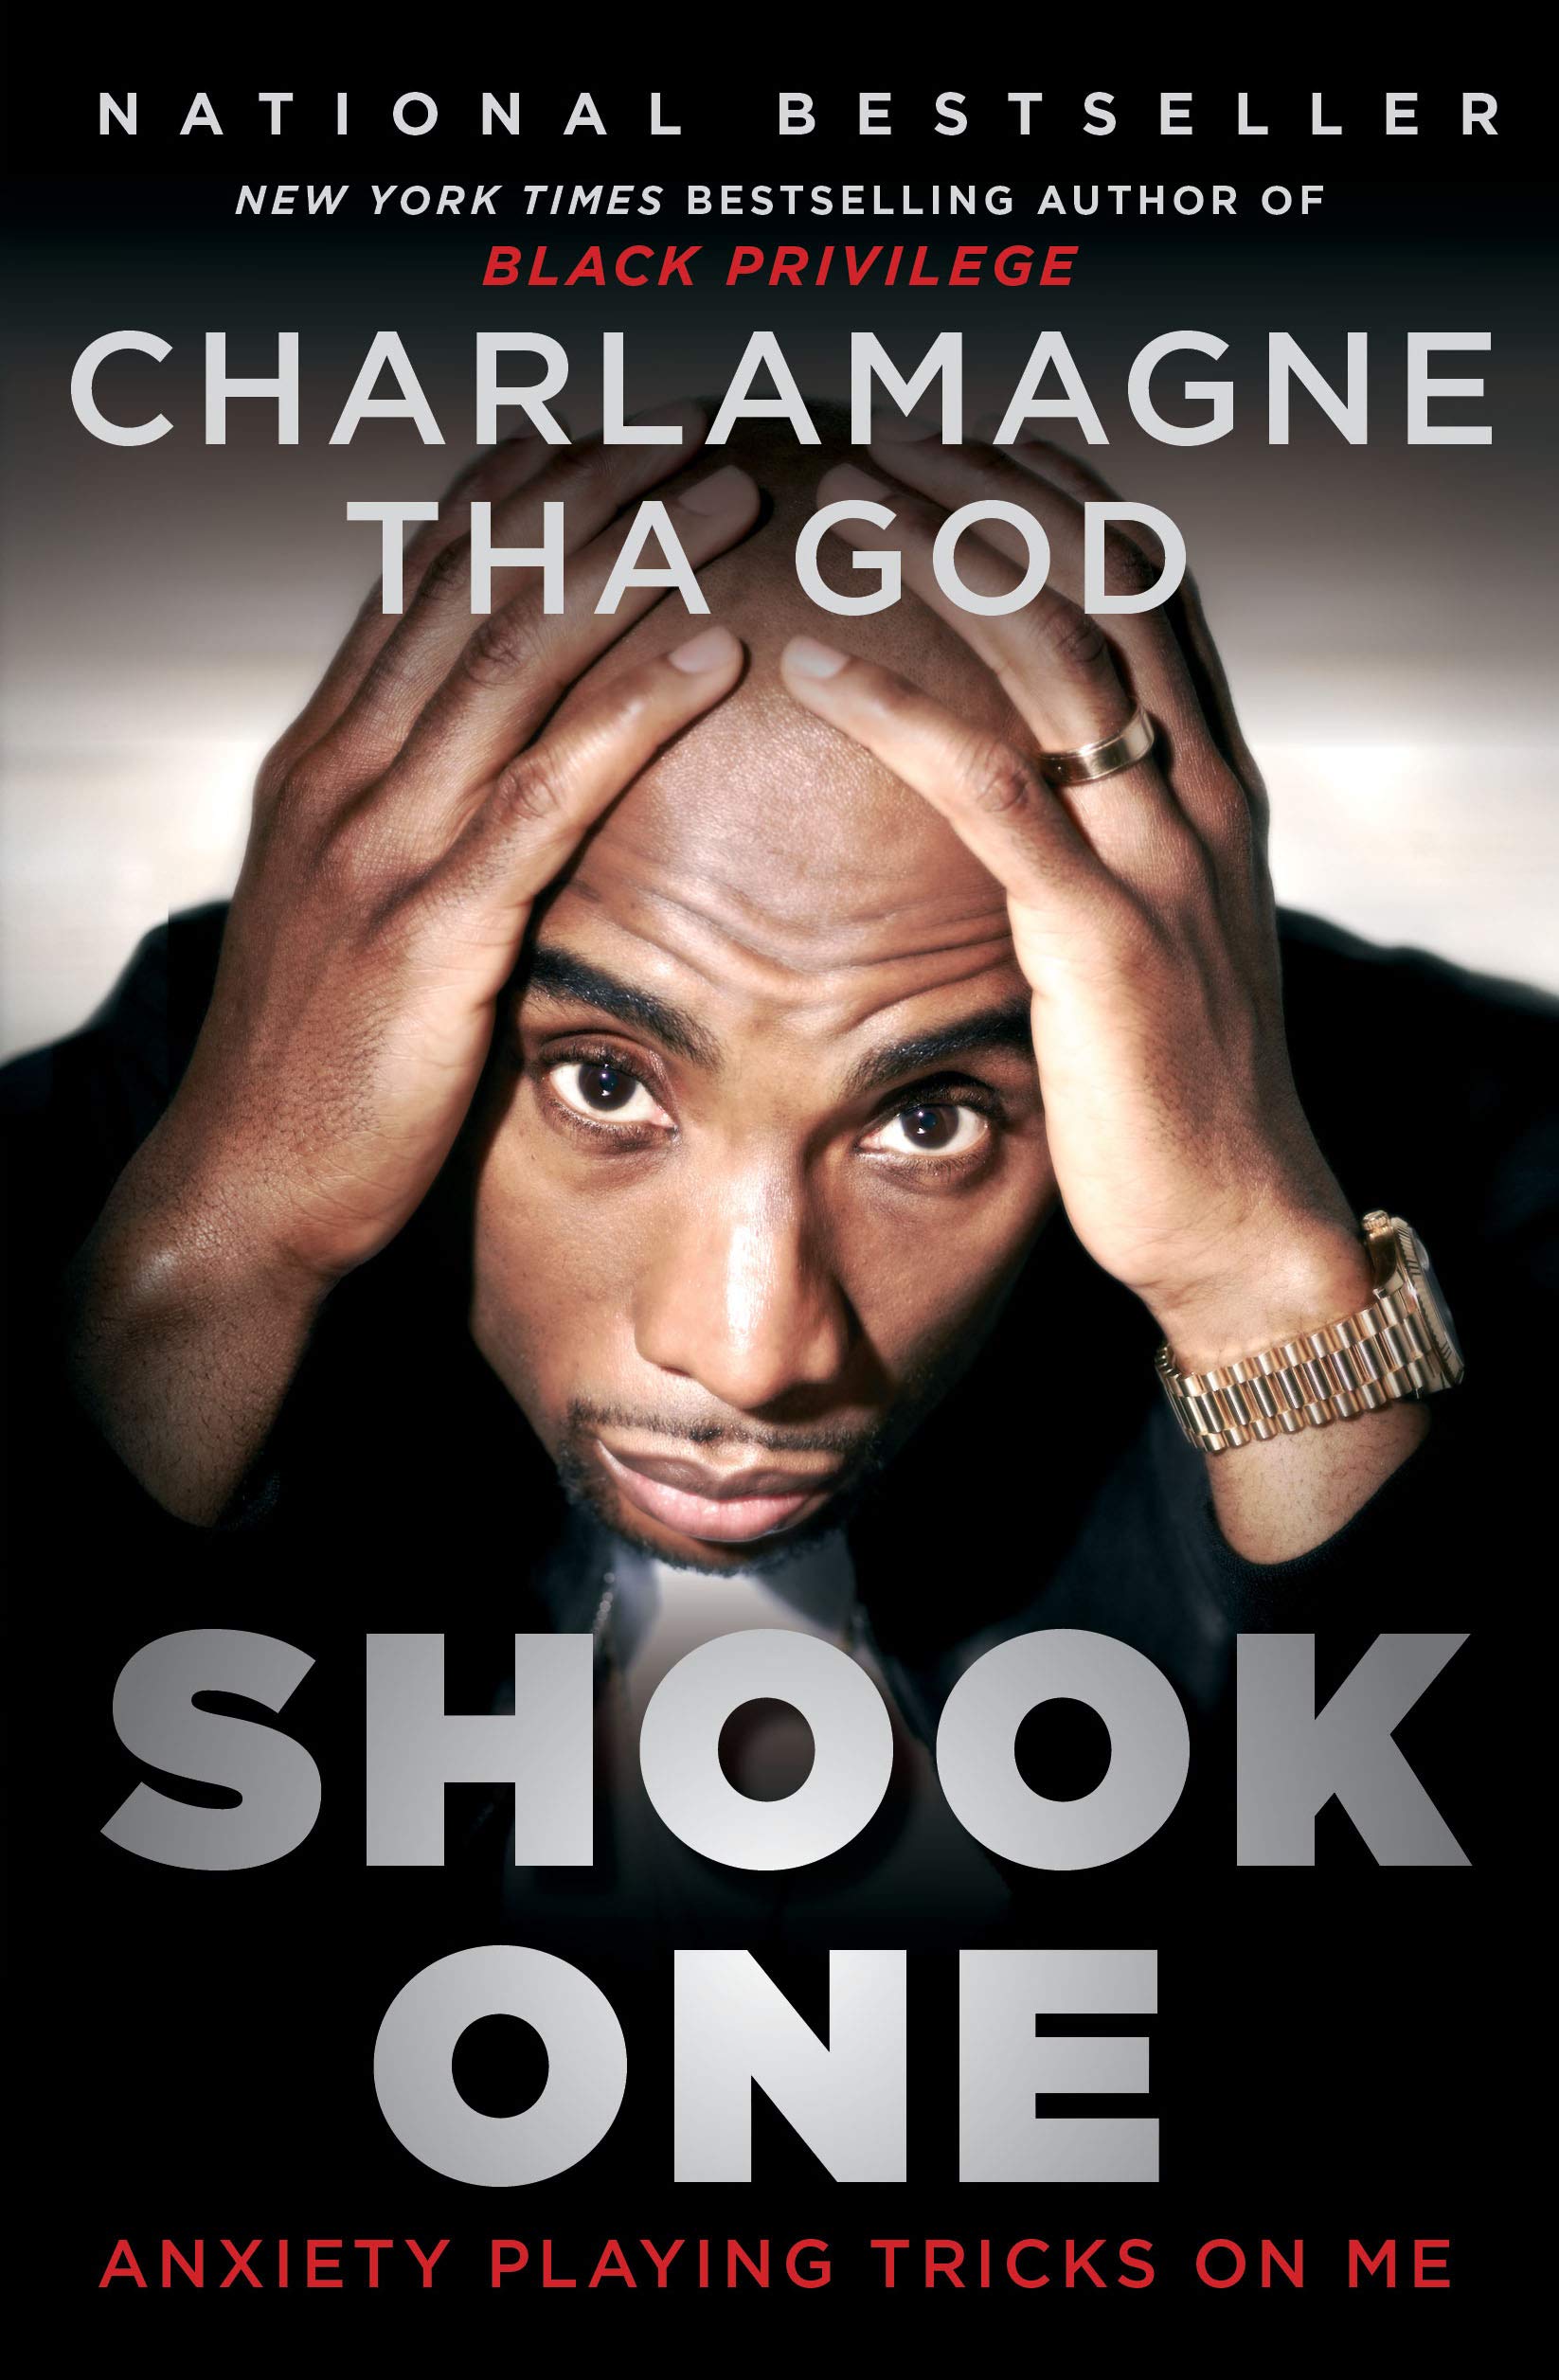 Book Cover of Shook One: Anxiety Playing Tricks on Me by Charlamagne Tha God